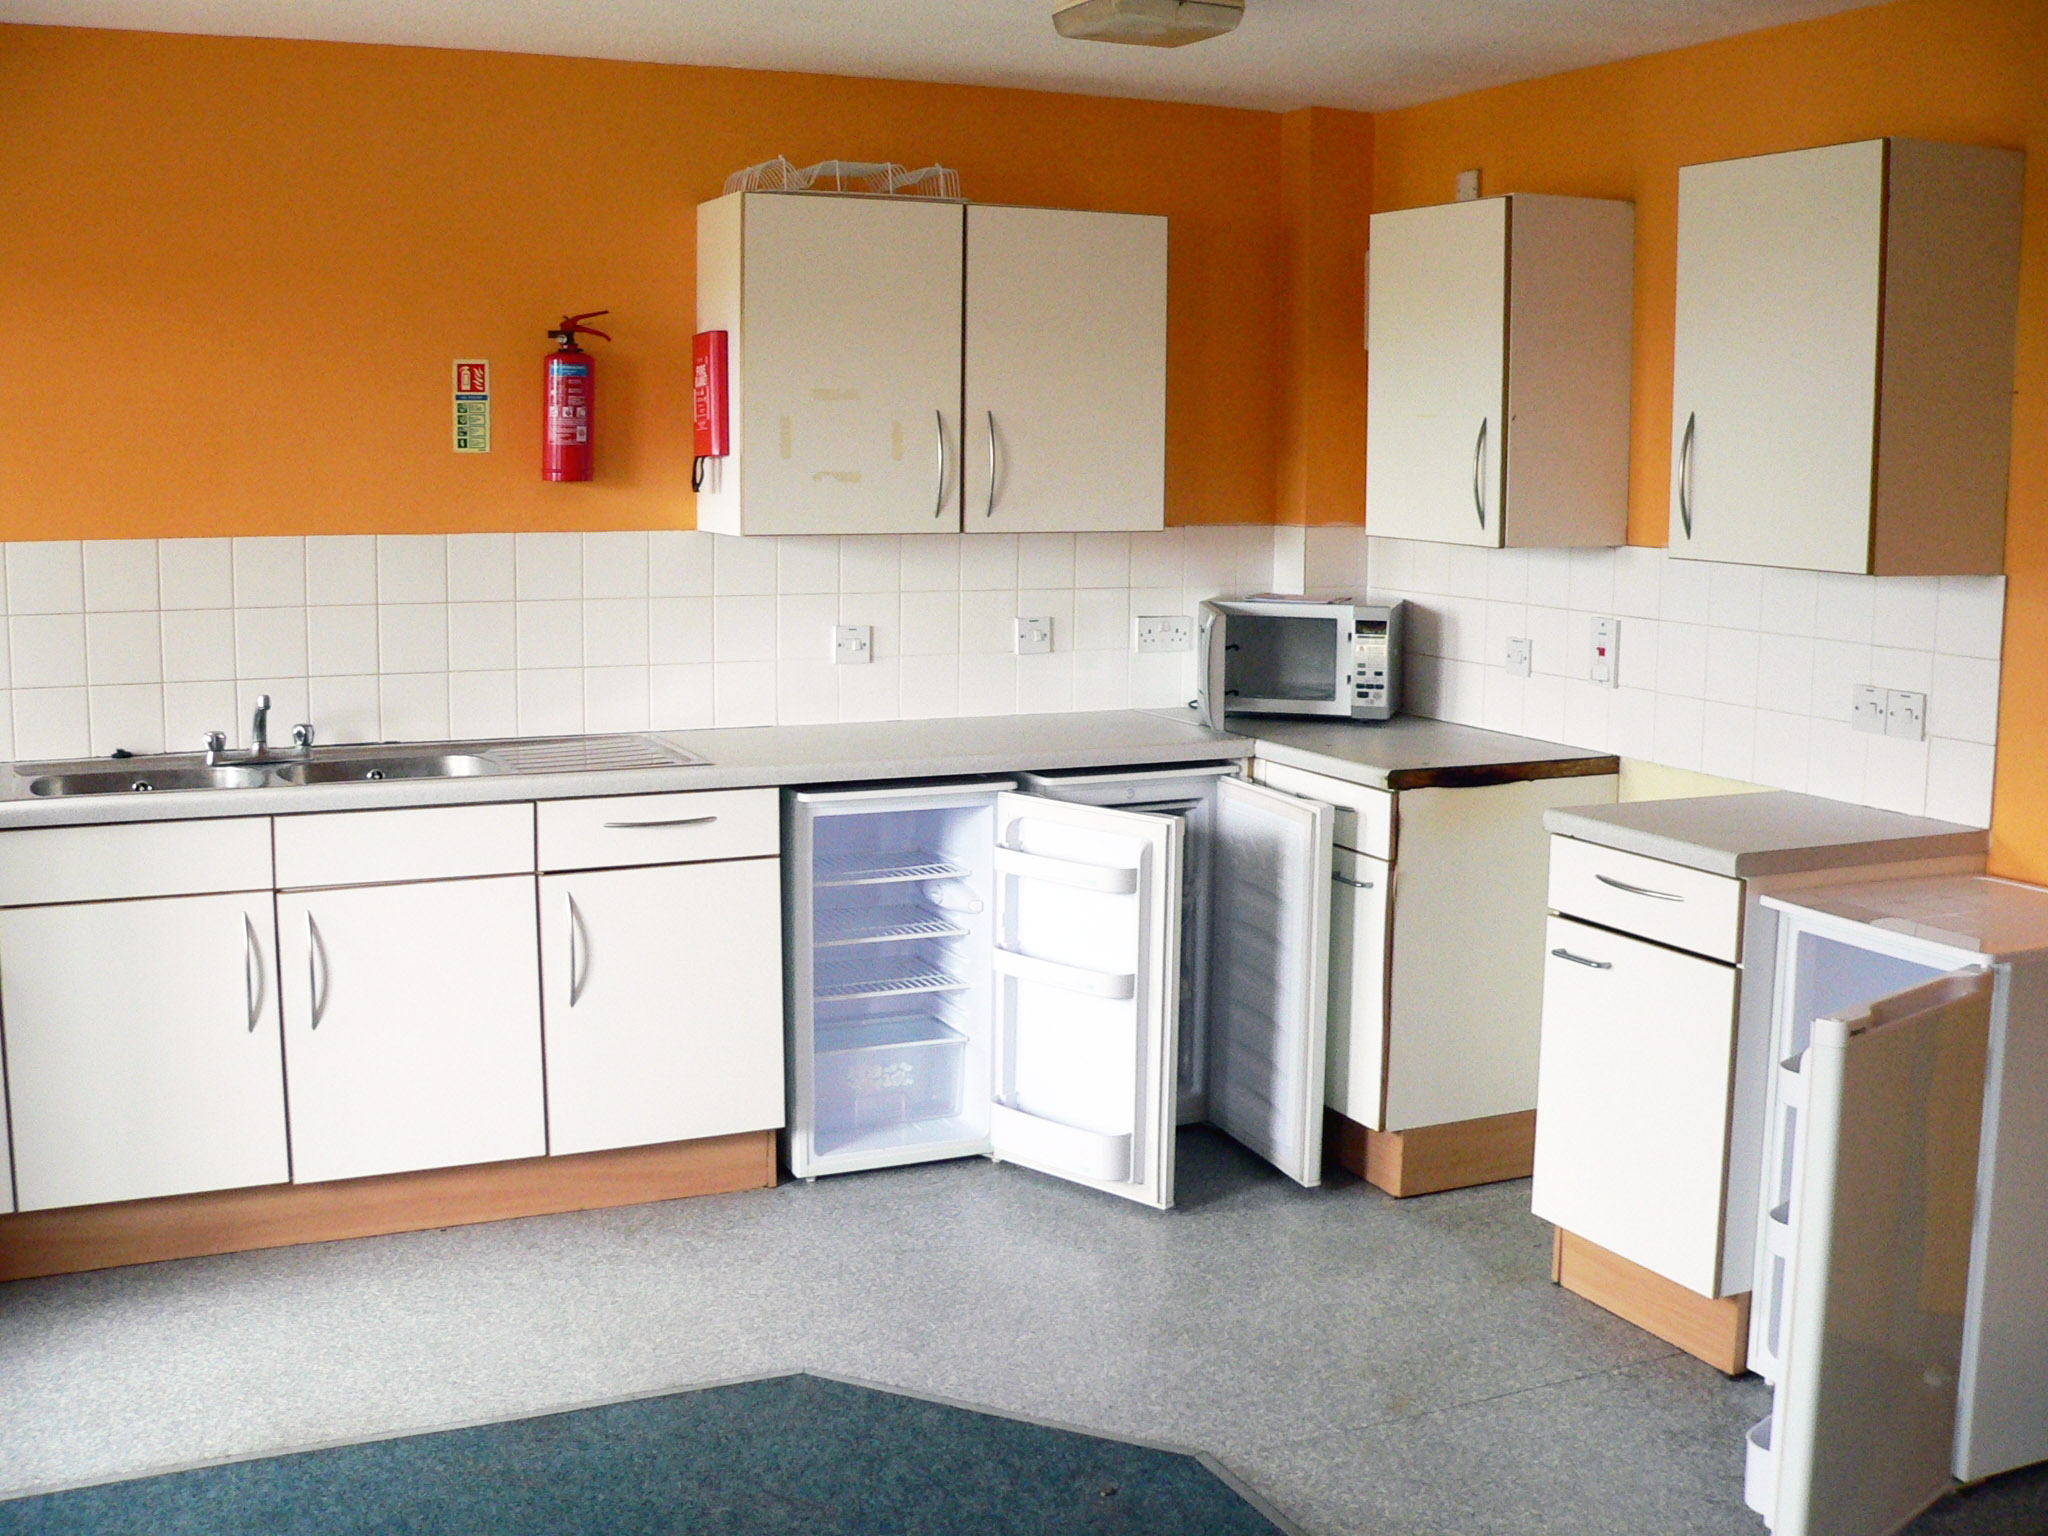 Kitchen in student residence hall in Brighton, England.